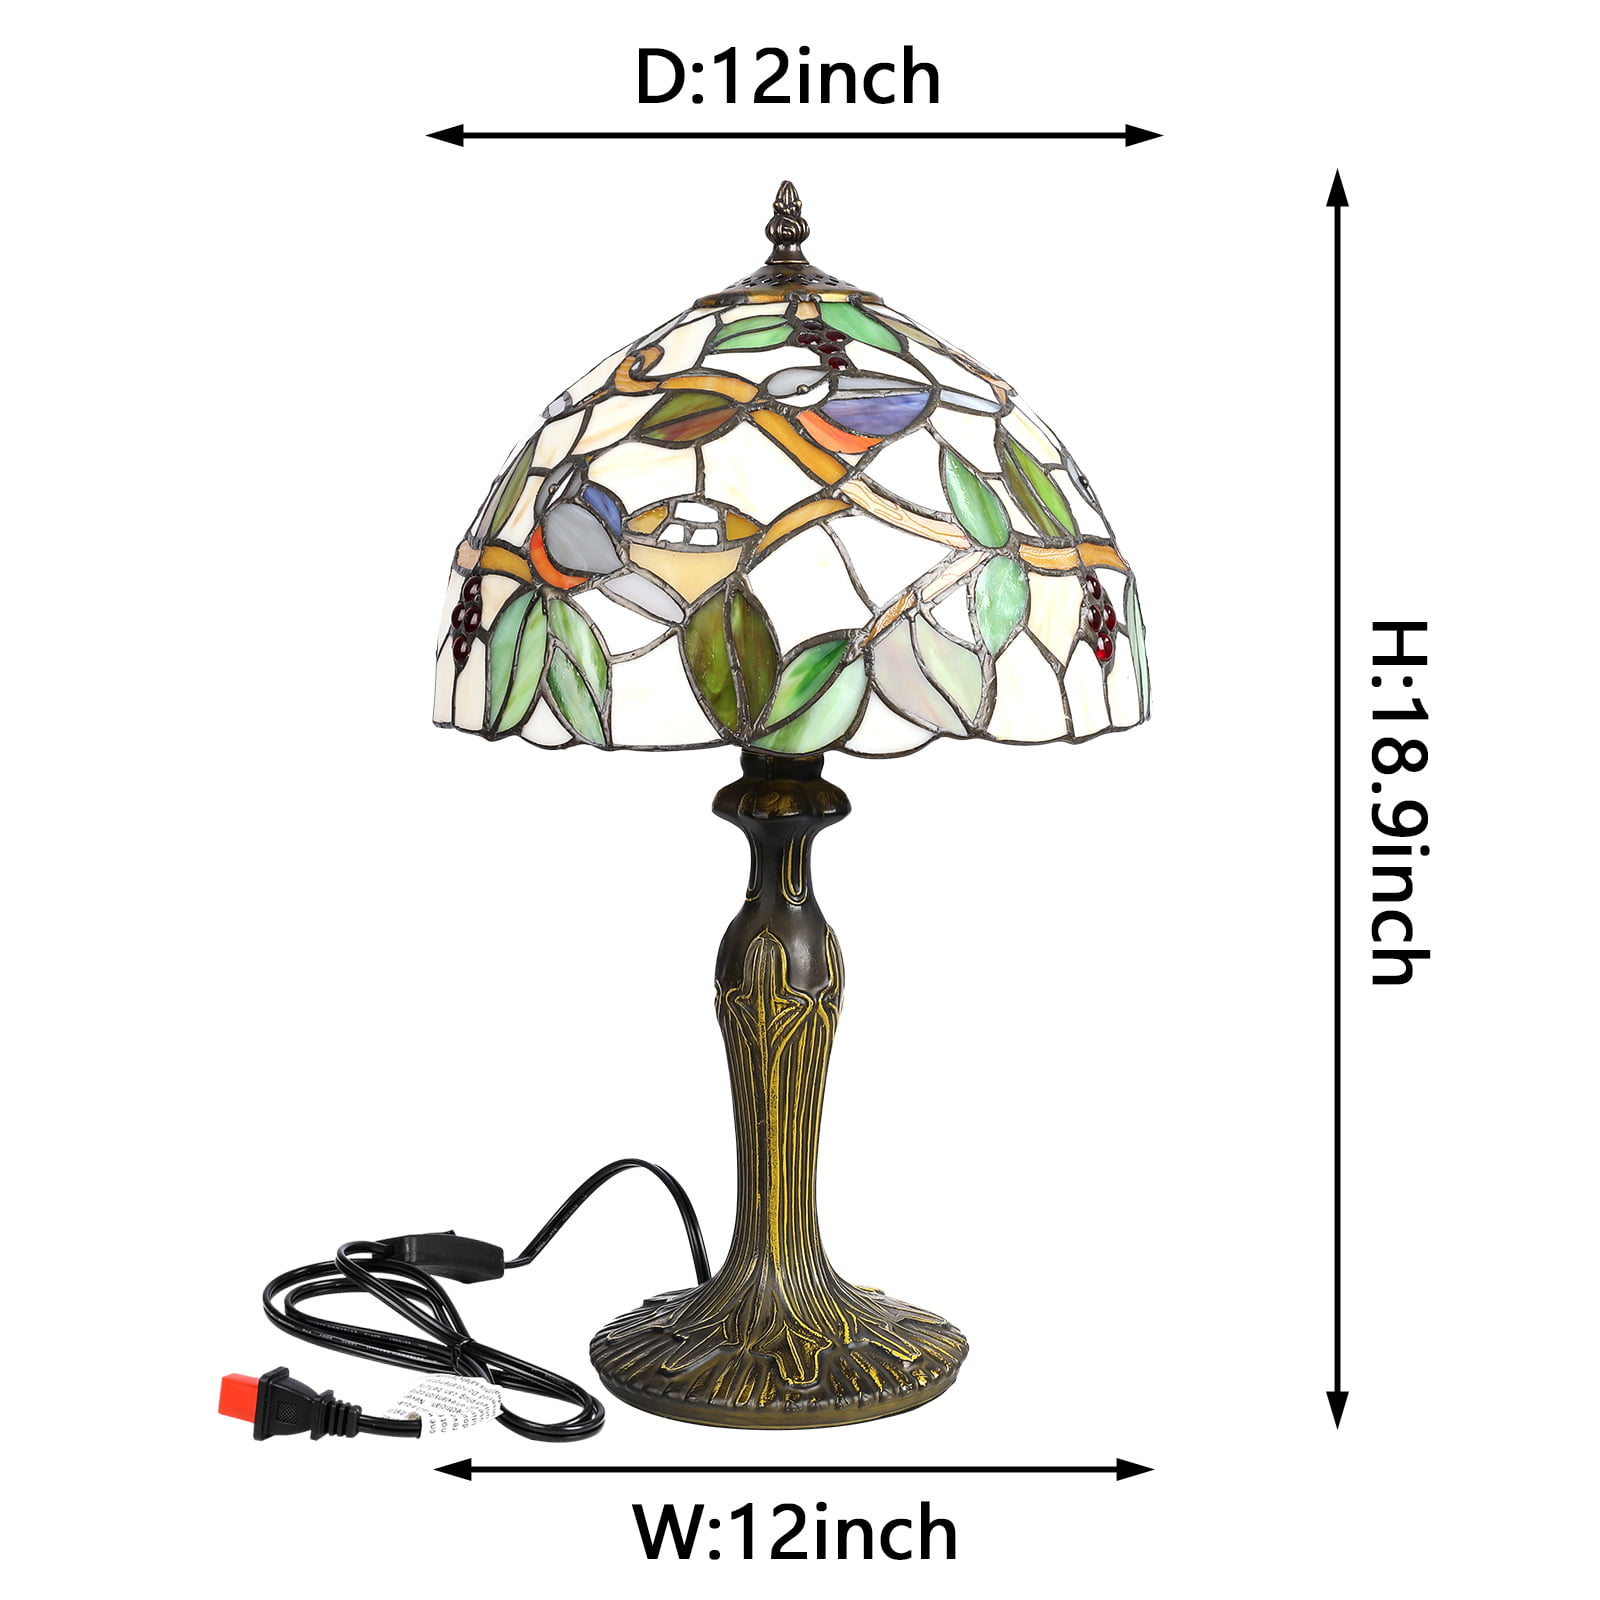 FUMAT Tiffany Table Lamp Bedside Nightstand Table Lamp,3-Way Dimmable LED  Stained Glass Lamp Shade for Side Small Table Lamps,8X8X14Inch Hotel,Office